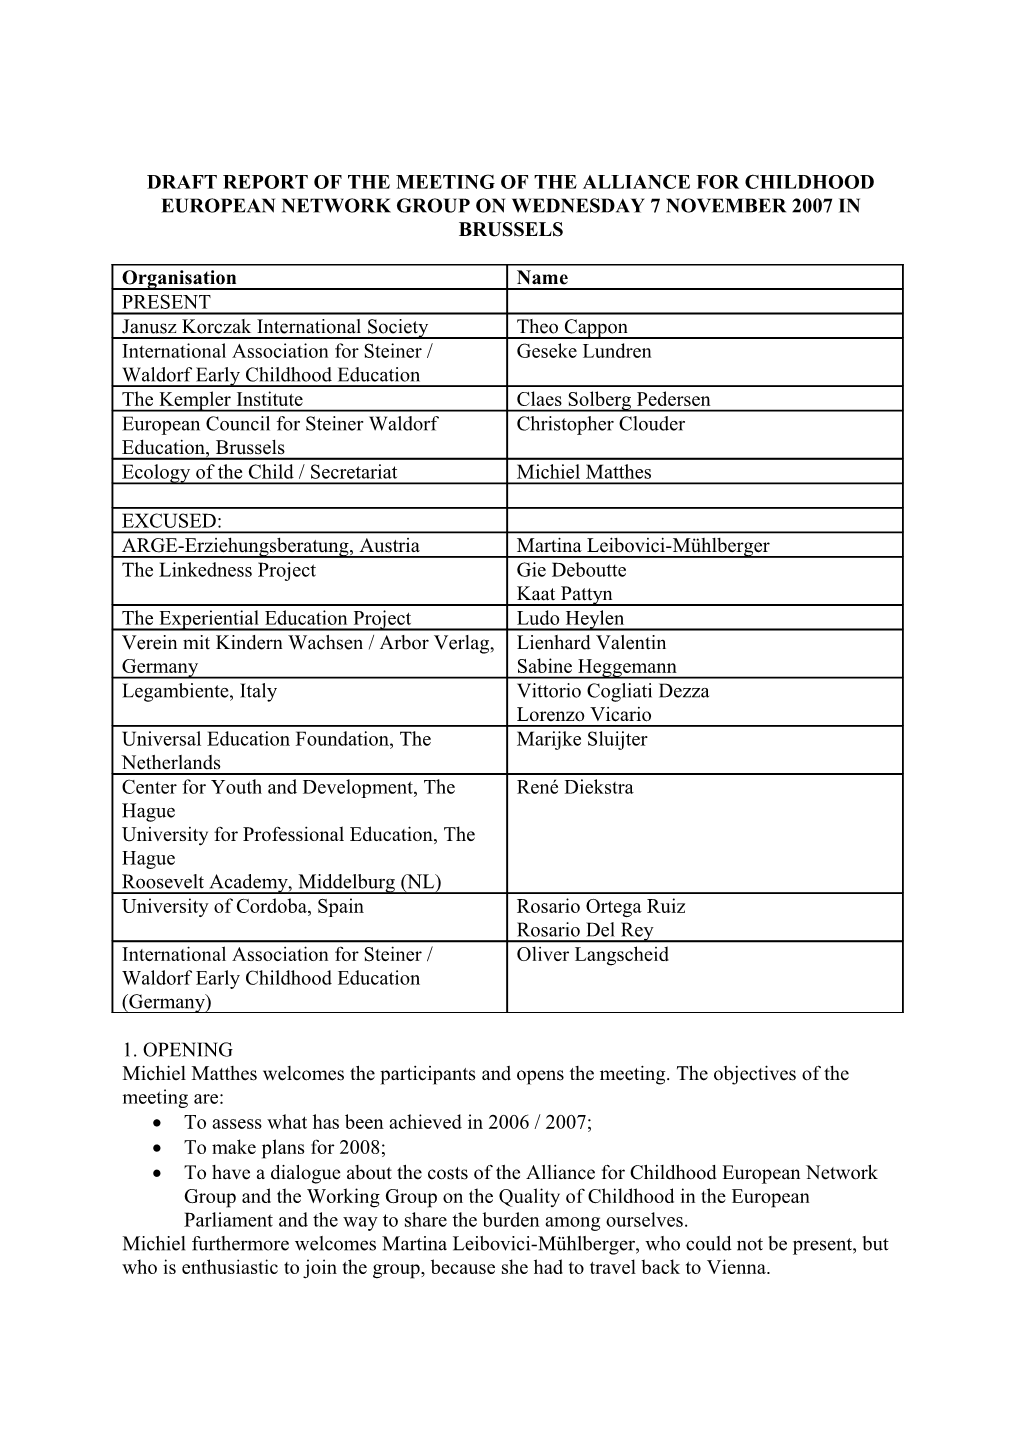 Draft Agenda of the Autumn 2006 Meeting of the Ecology of the Child European Network Group